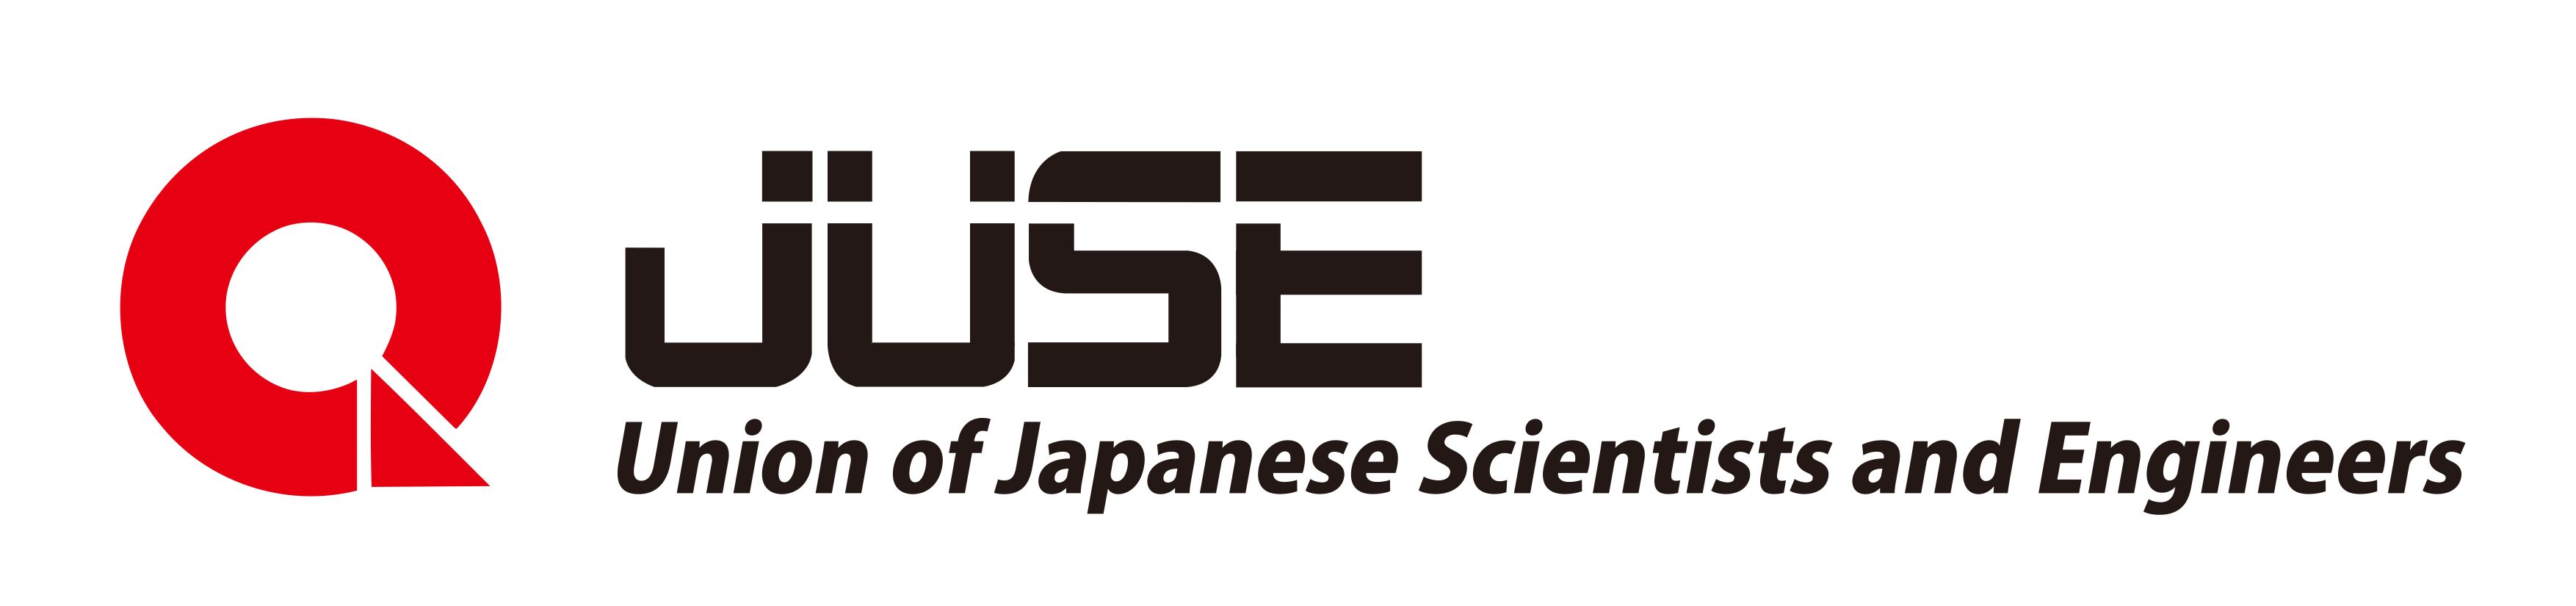 JUSE:Union of Japanese Scientists and Engineers - LUD

KN Union of Japanese Scientists and Engineers